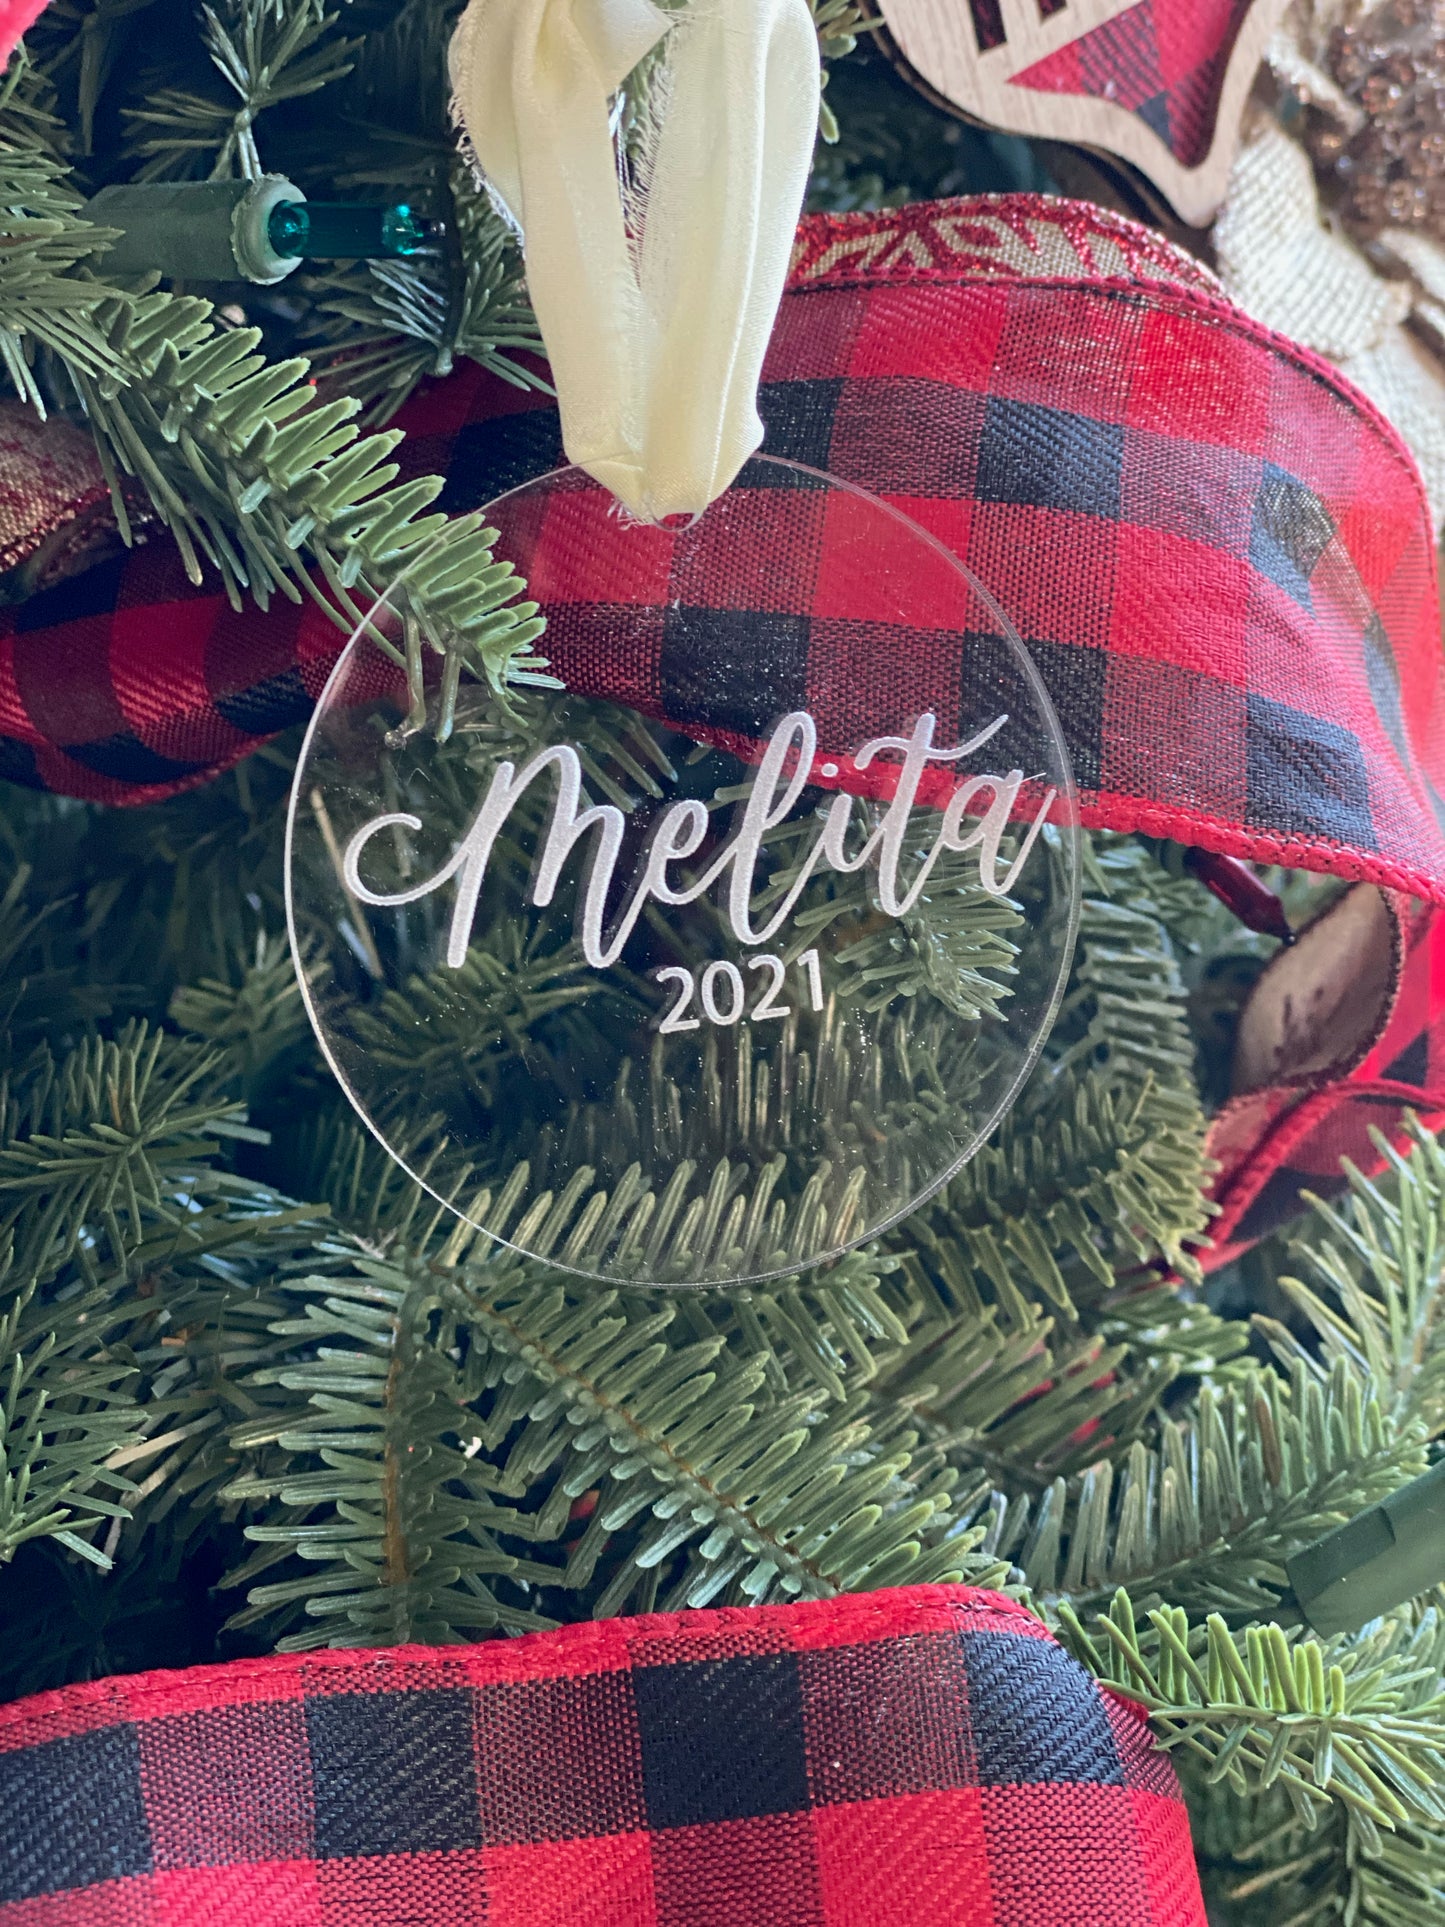 Personalized Engraved Round Christmas Ornament | Custom Round Acrylic Ornaments | Personalized Holiday Ornaments